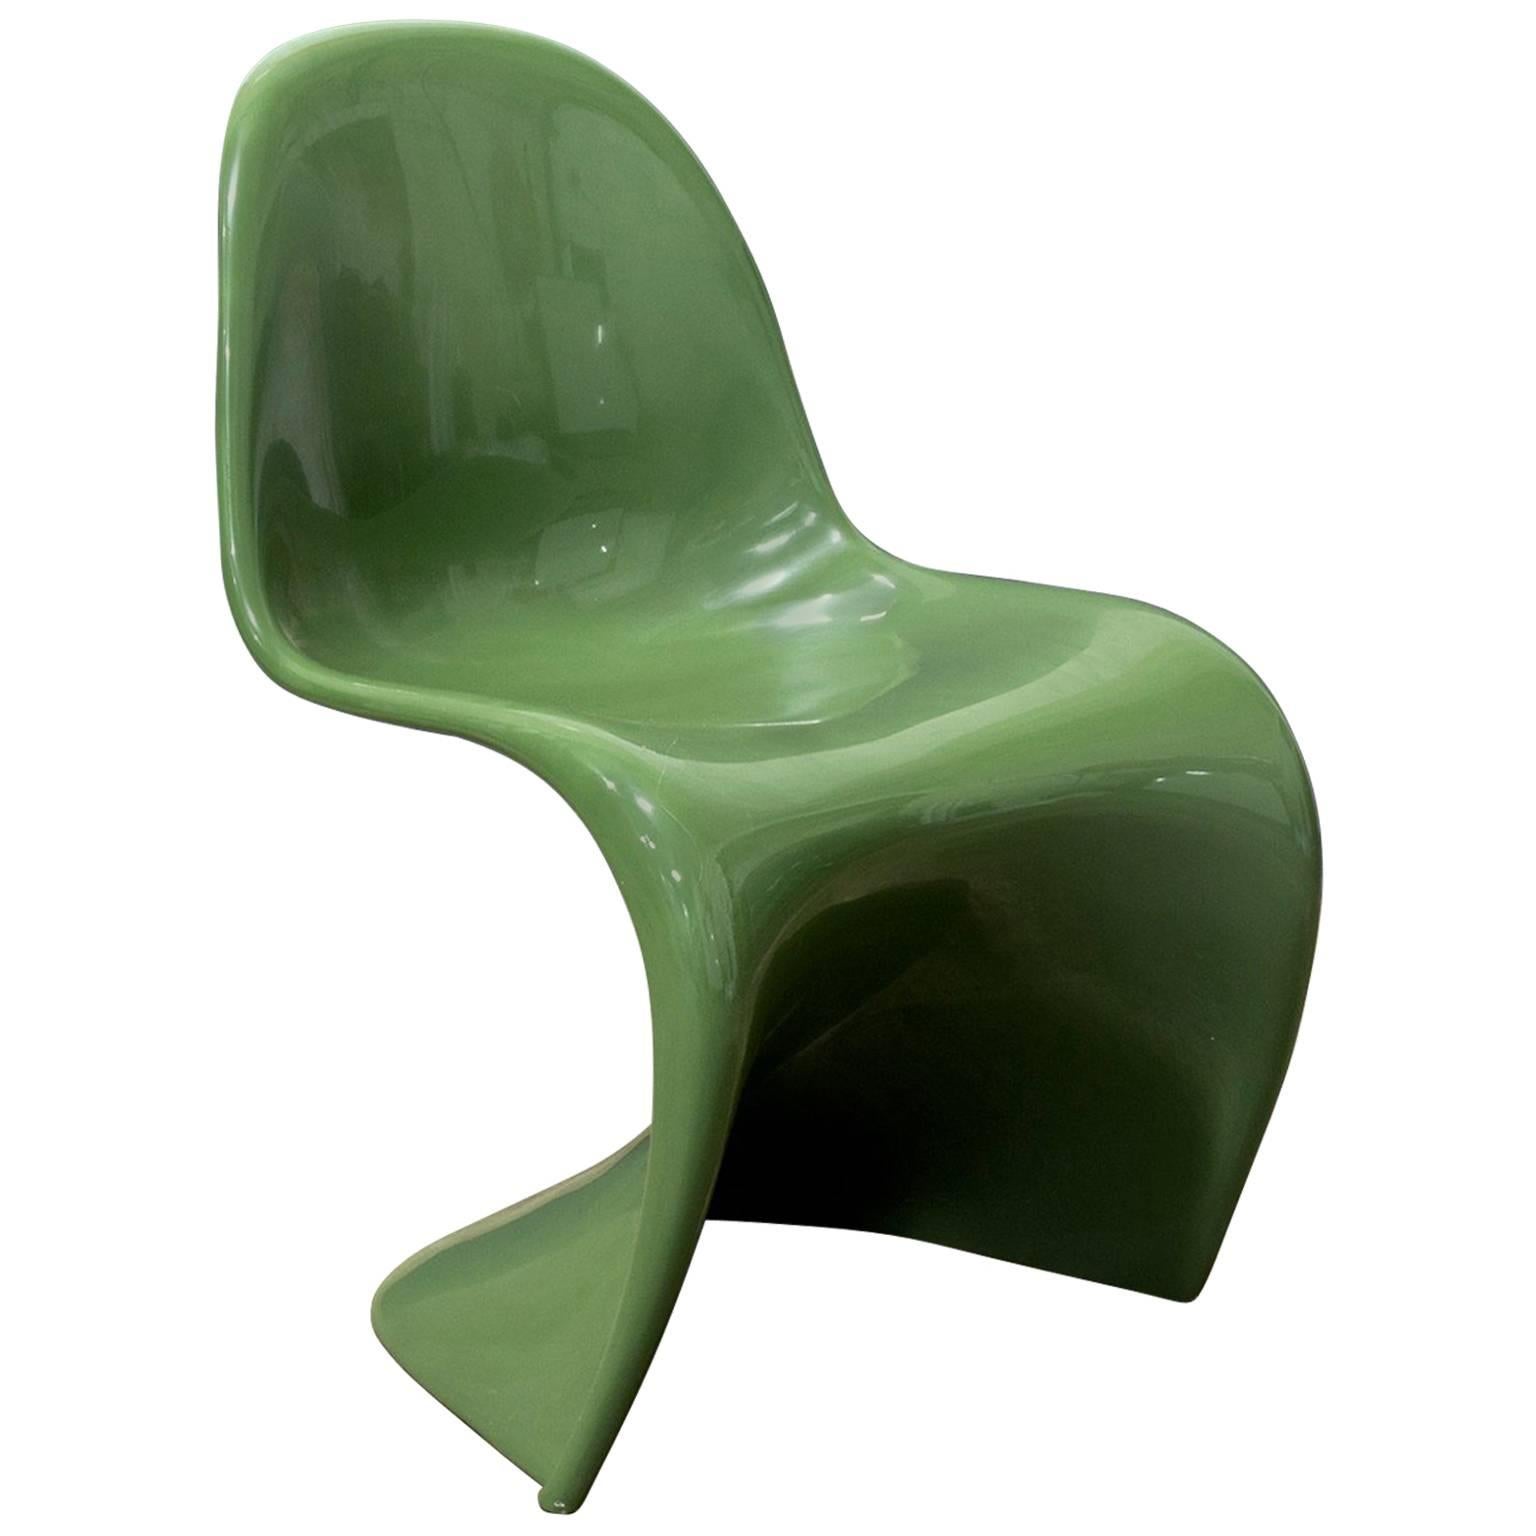 1965, Verner Panton, Stacking Chair, Herman Miller, First Edition in Green